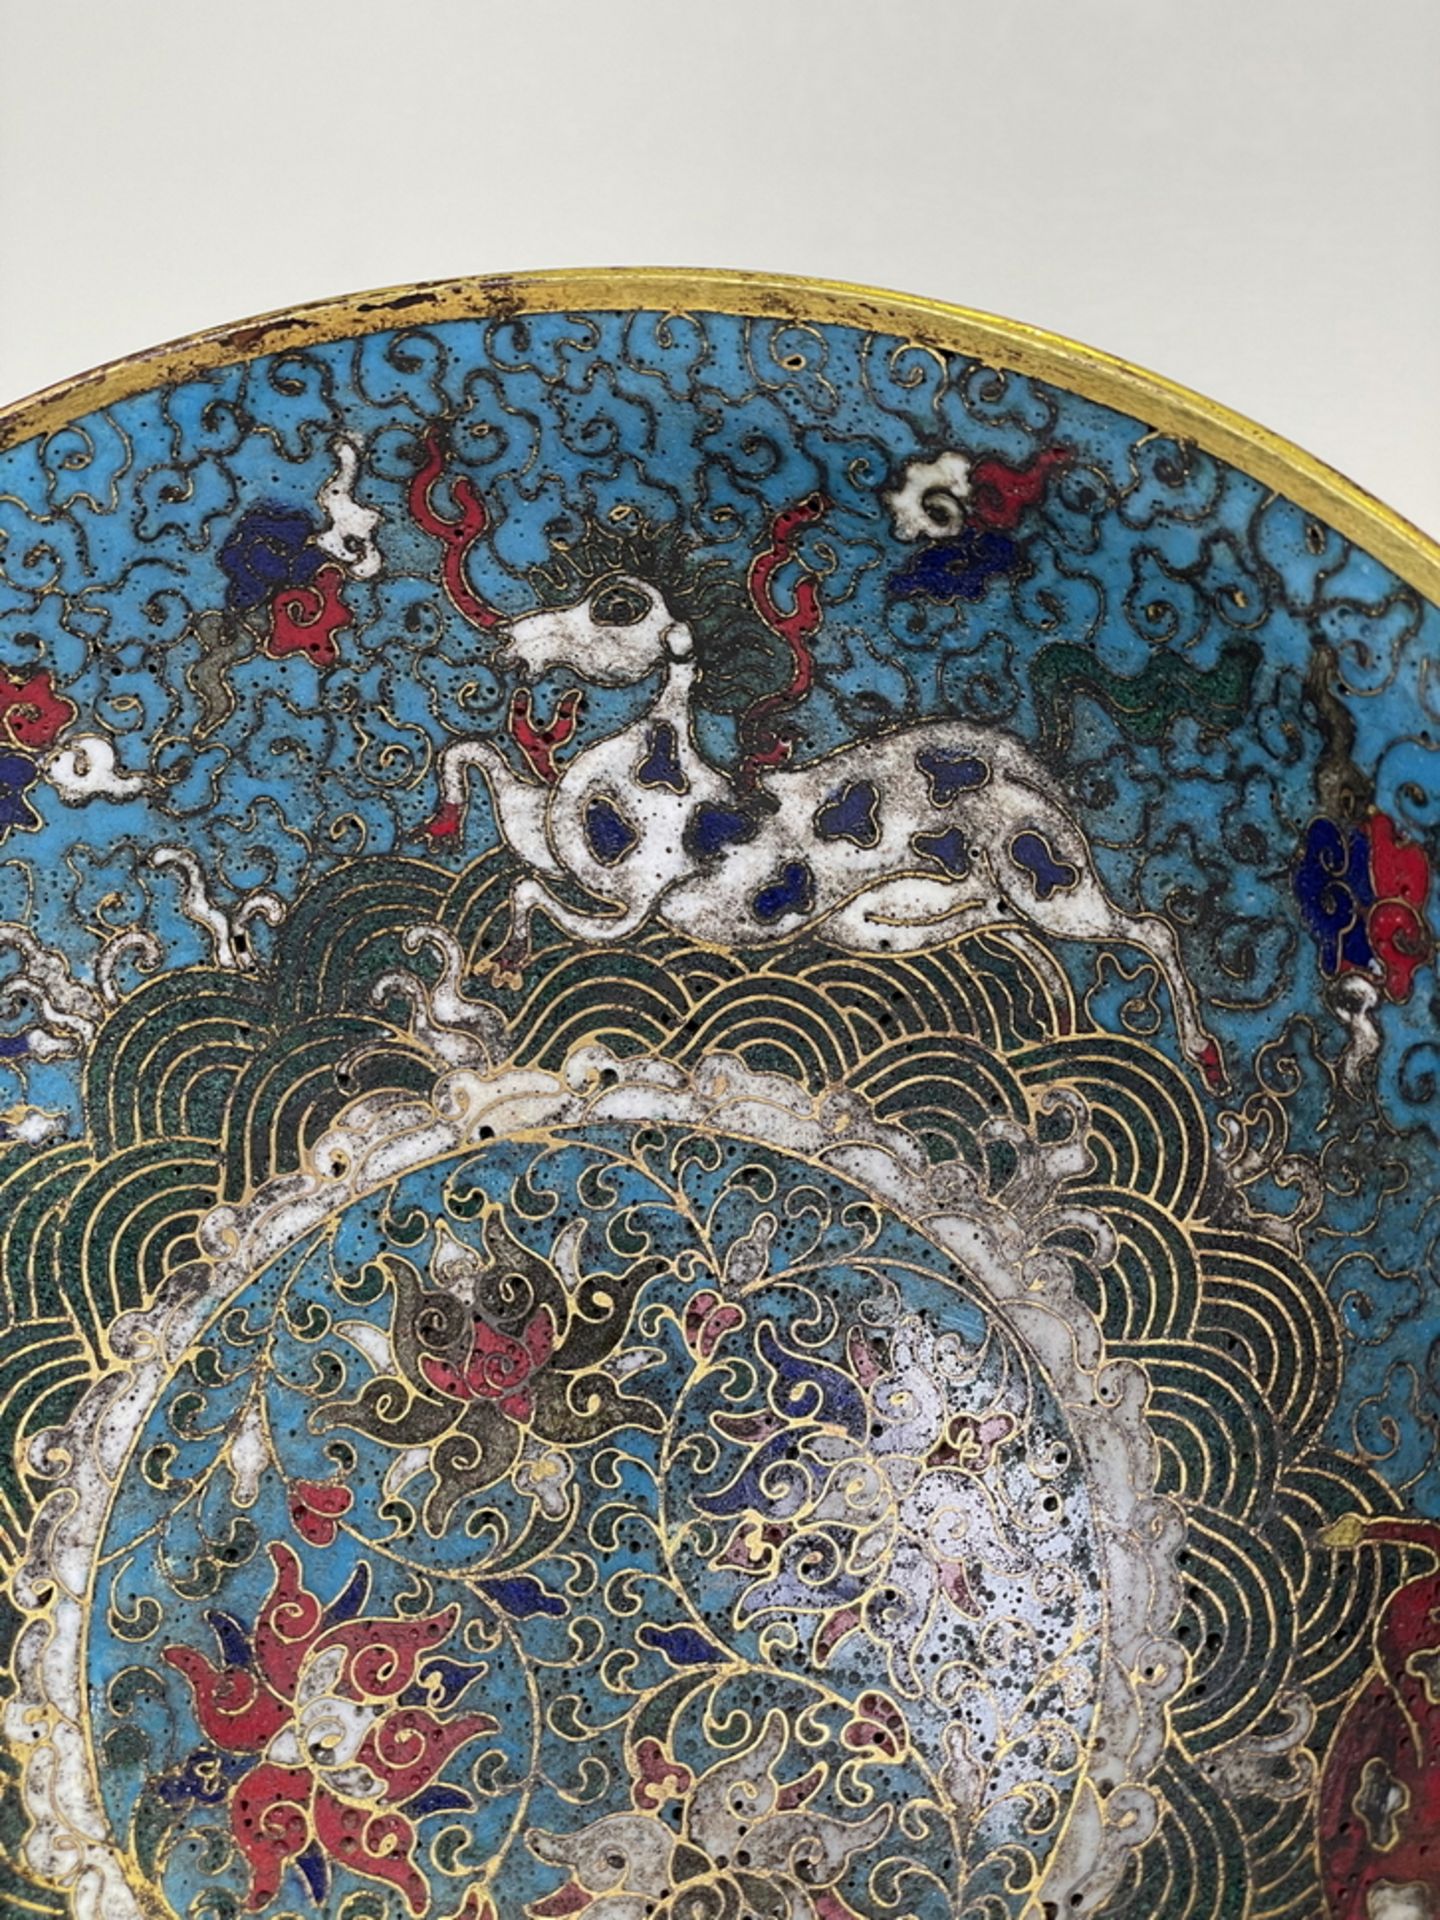 FINE CHINESE CLOISONNE, 17TH/18TH Century Pr.  Collection of NARA private gallary.  - Image 11 of 11